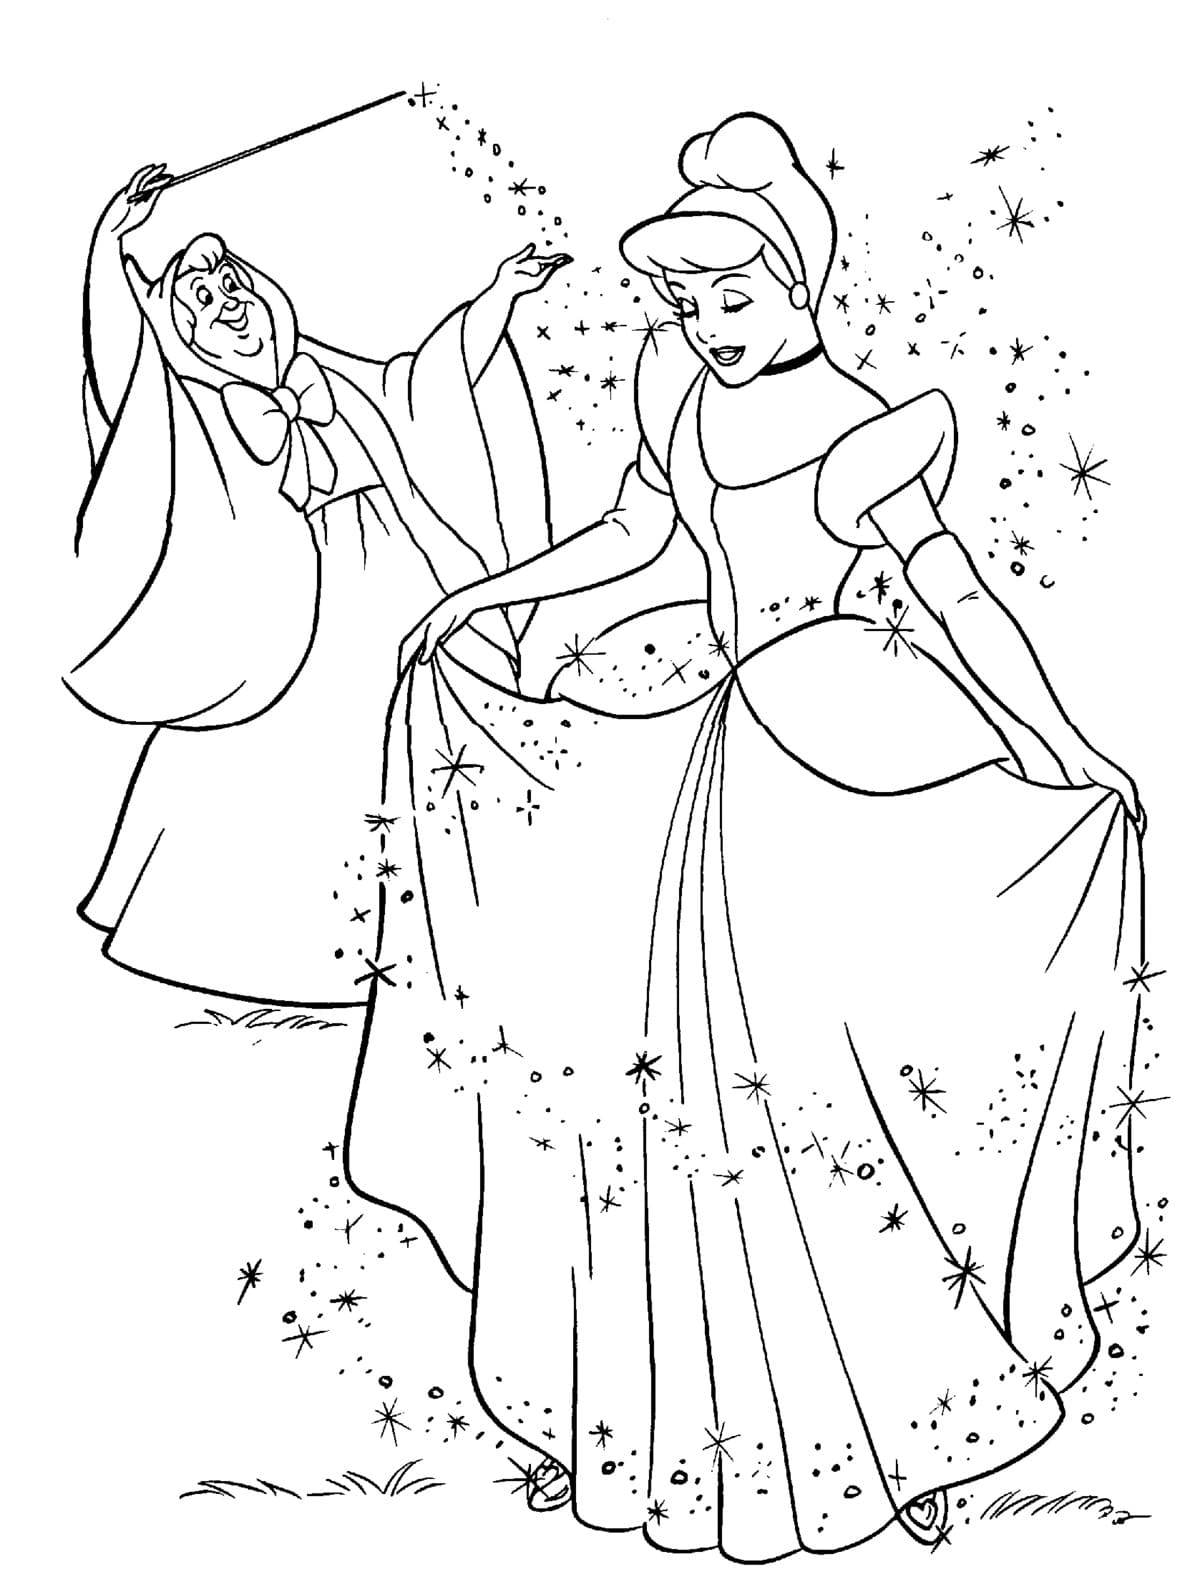 Princess Coloring Pages. 100 Images Free Printable